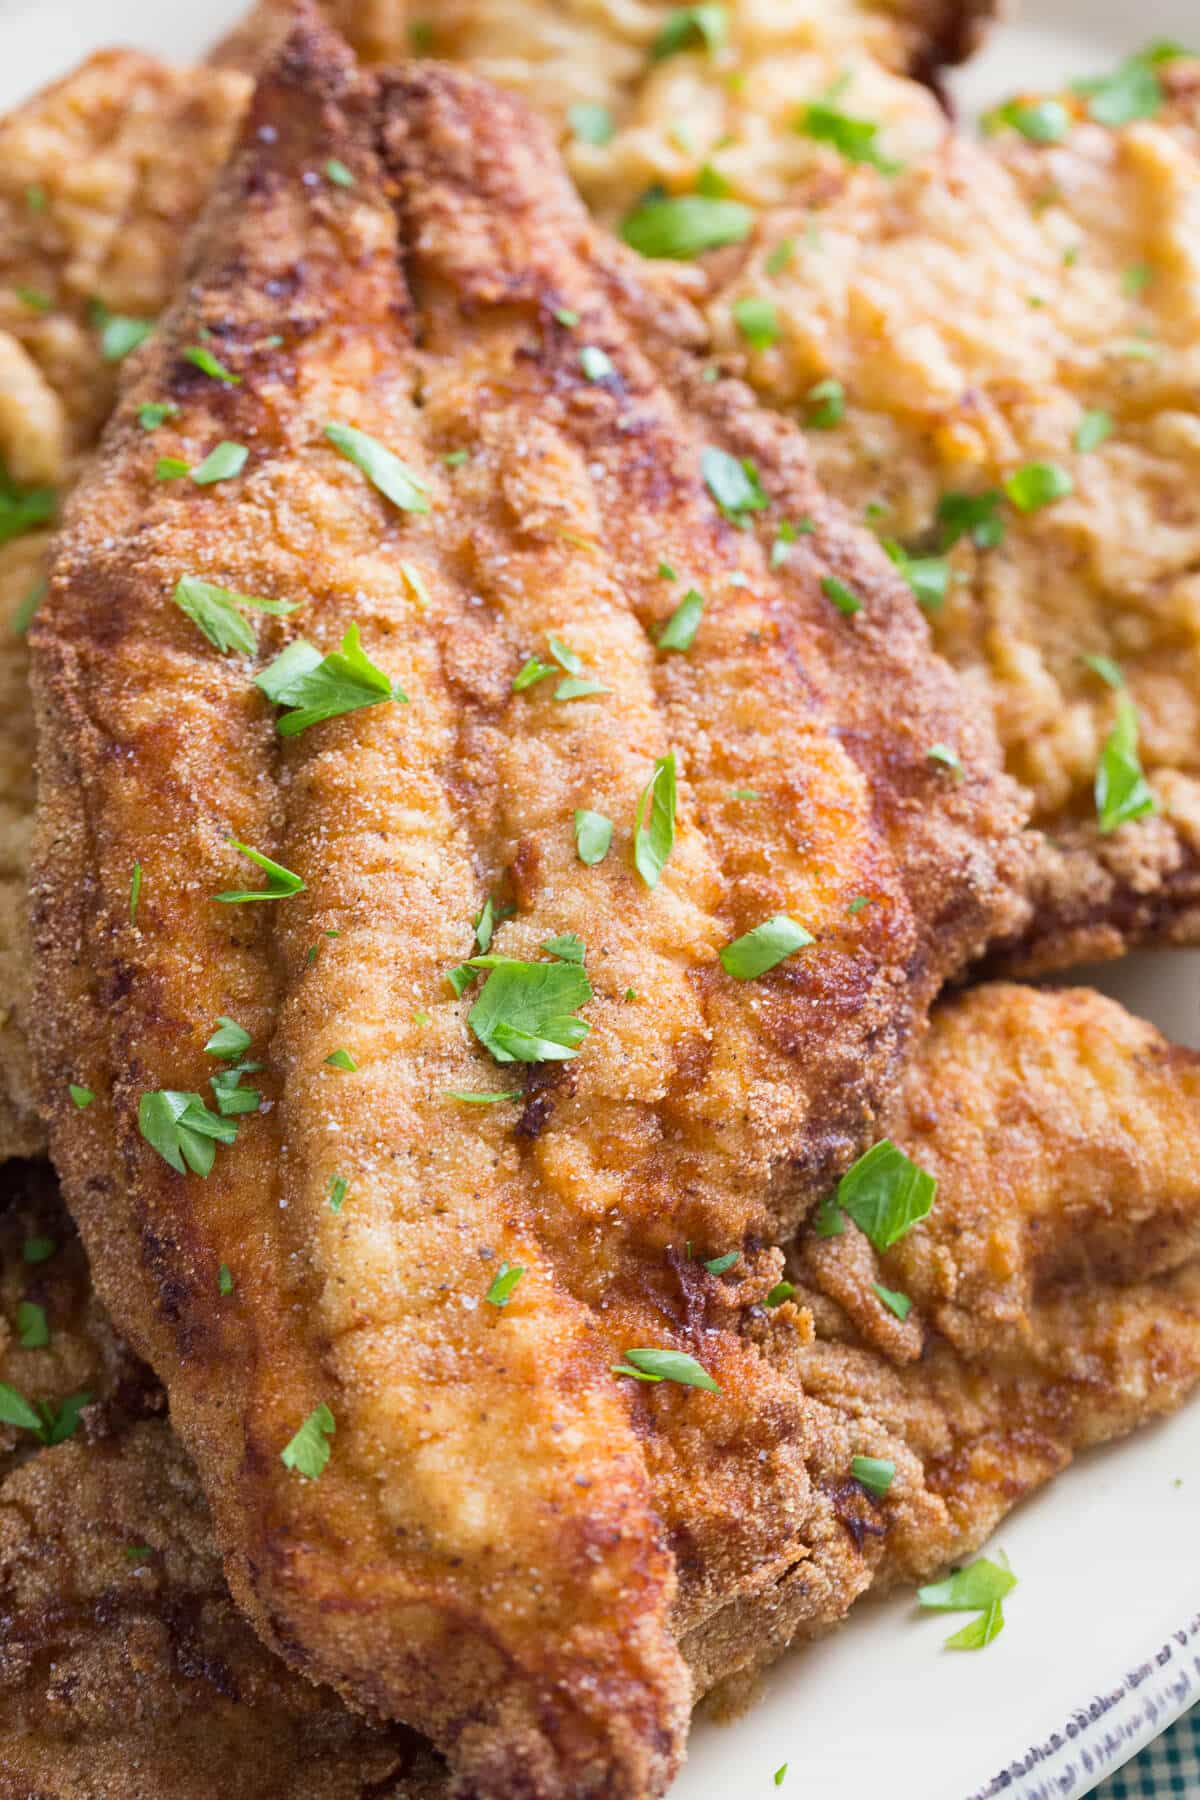 This is fried catfish at it's best! It is crisp on the outside and flaky on the inside, just as it should be!